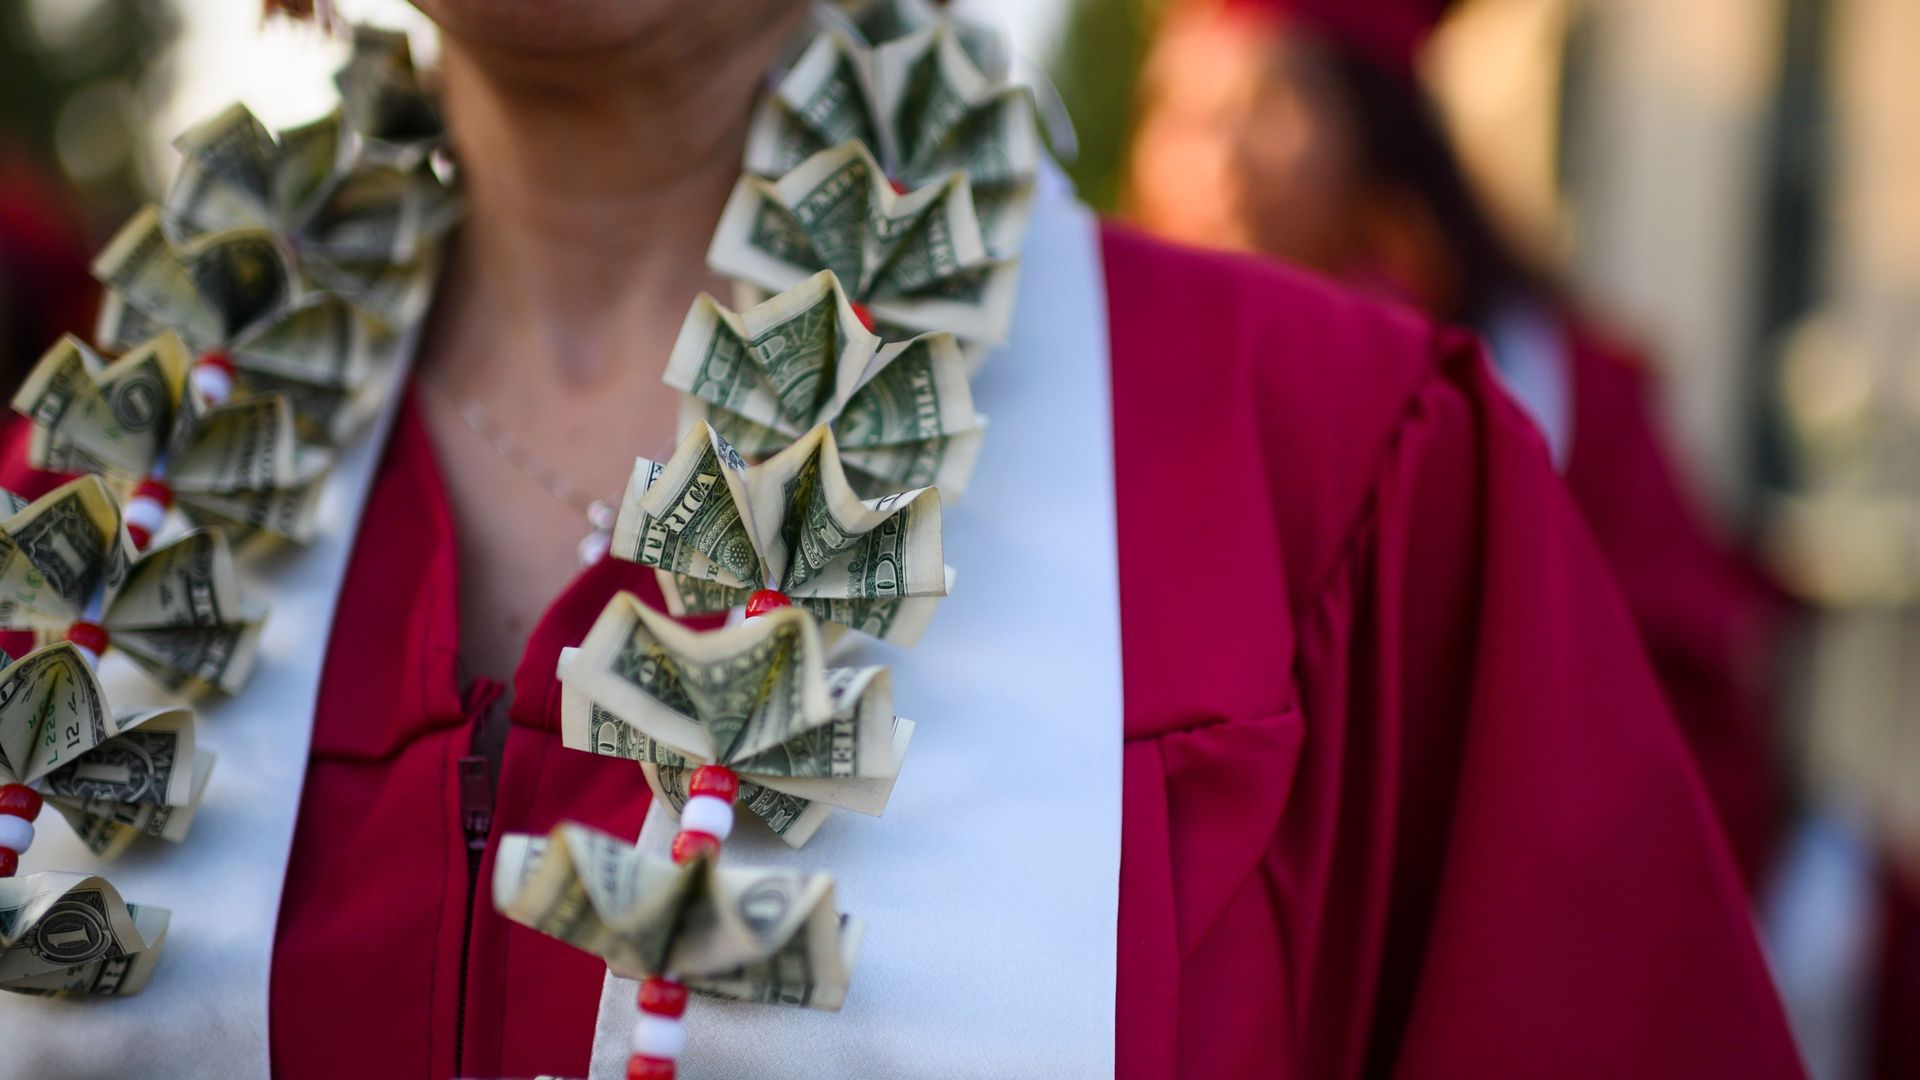 In this image, a woman wears a gown with a sash and folded dollar bills.